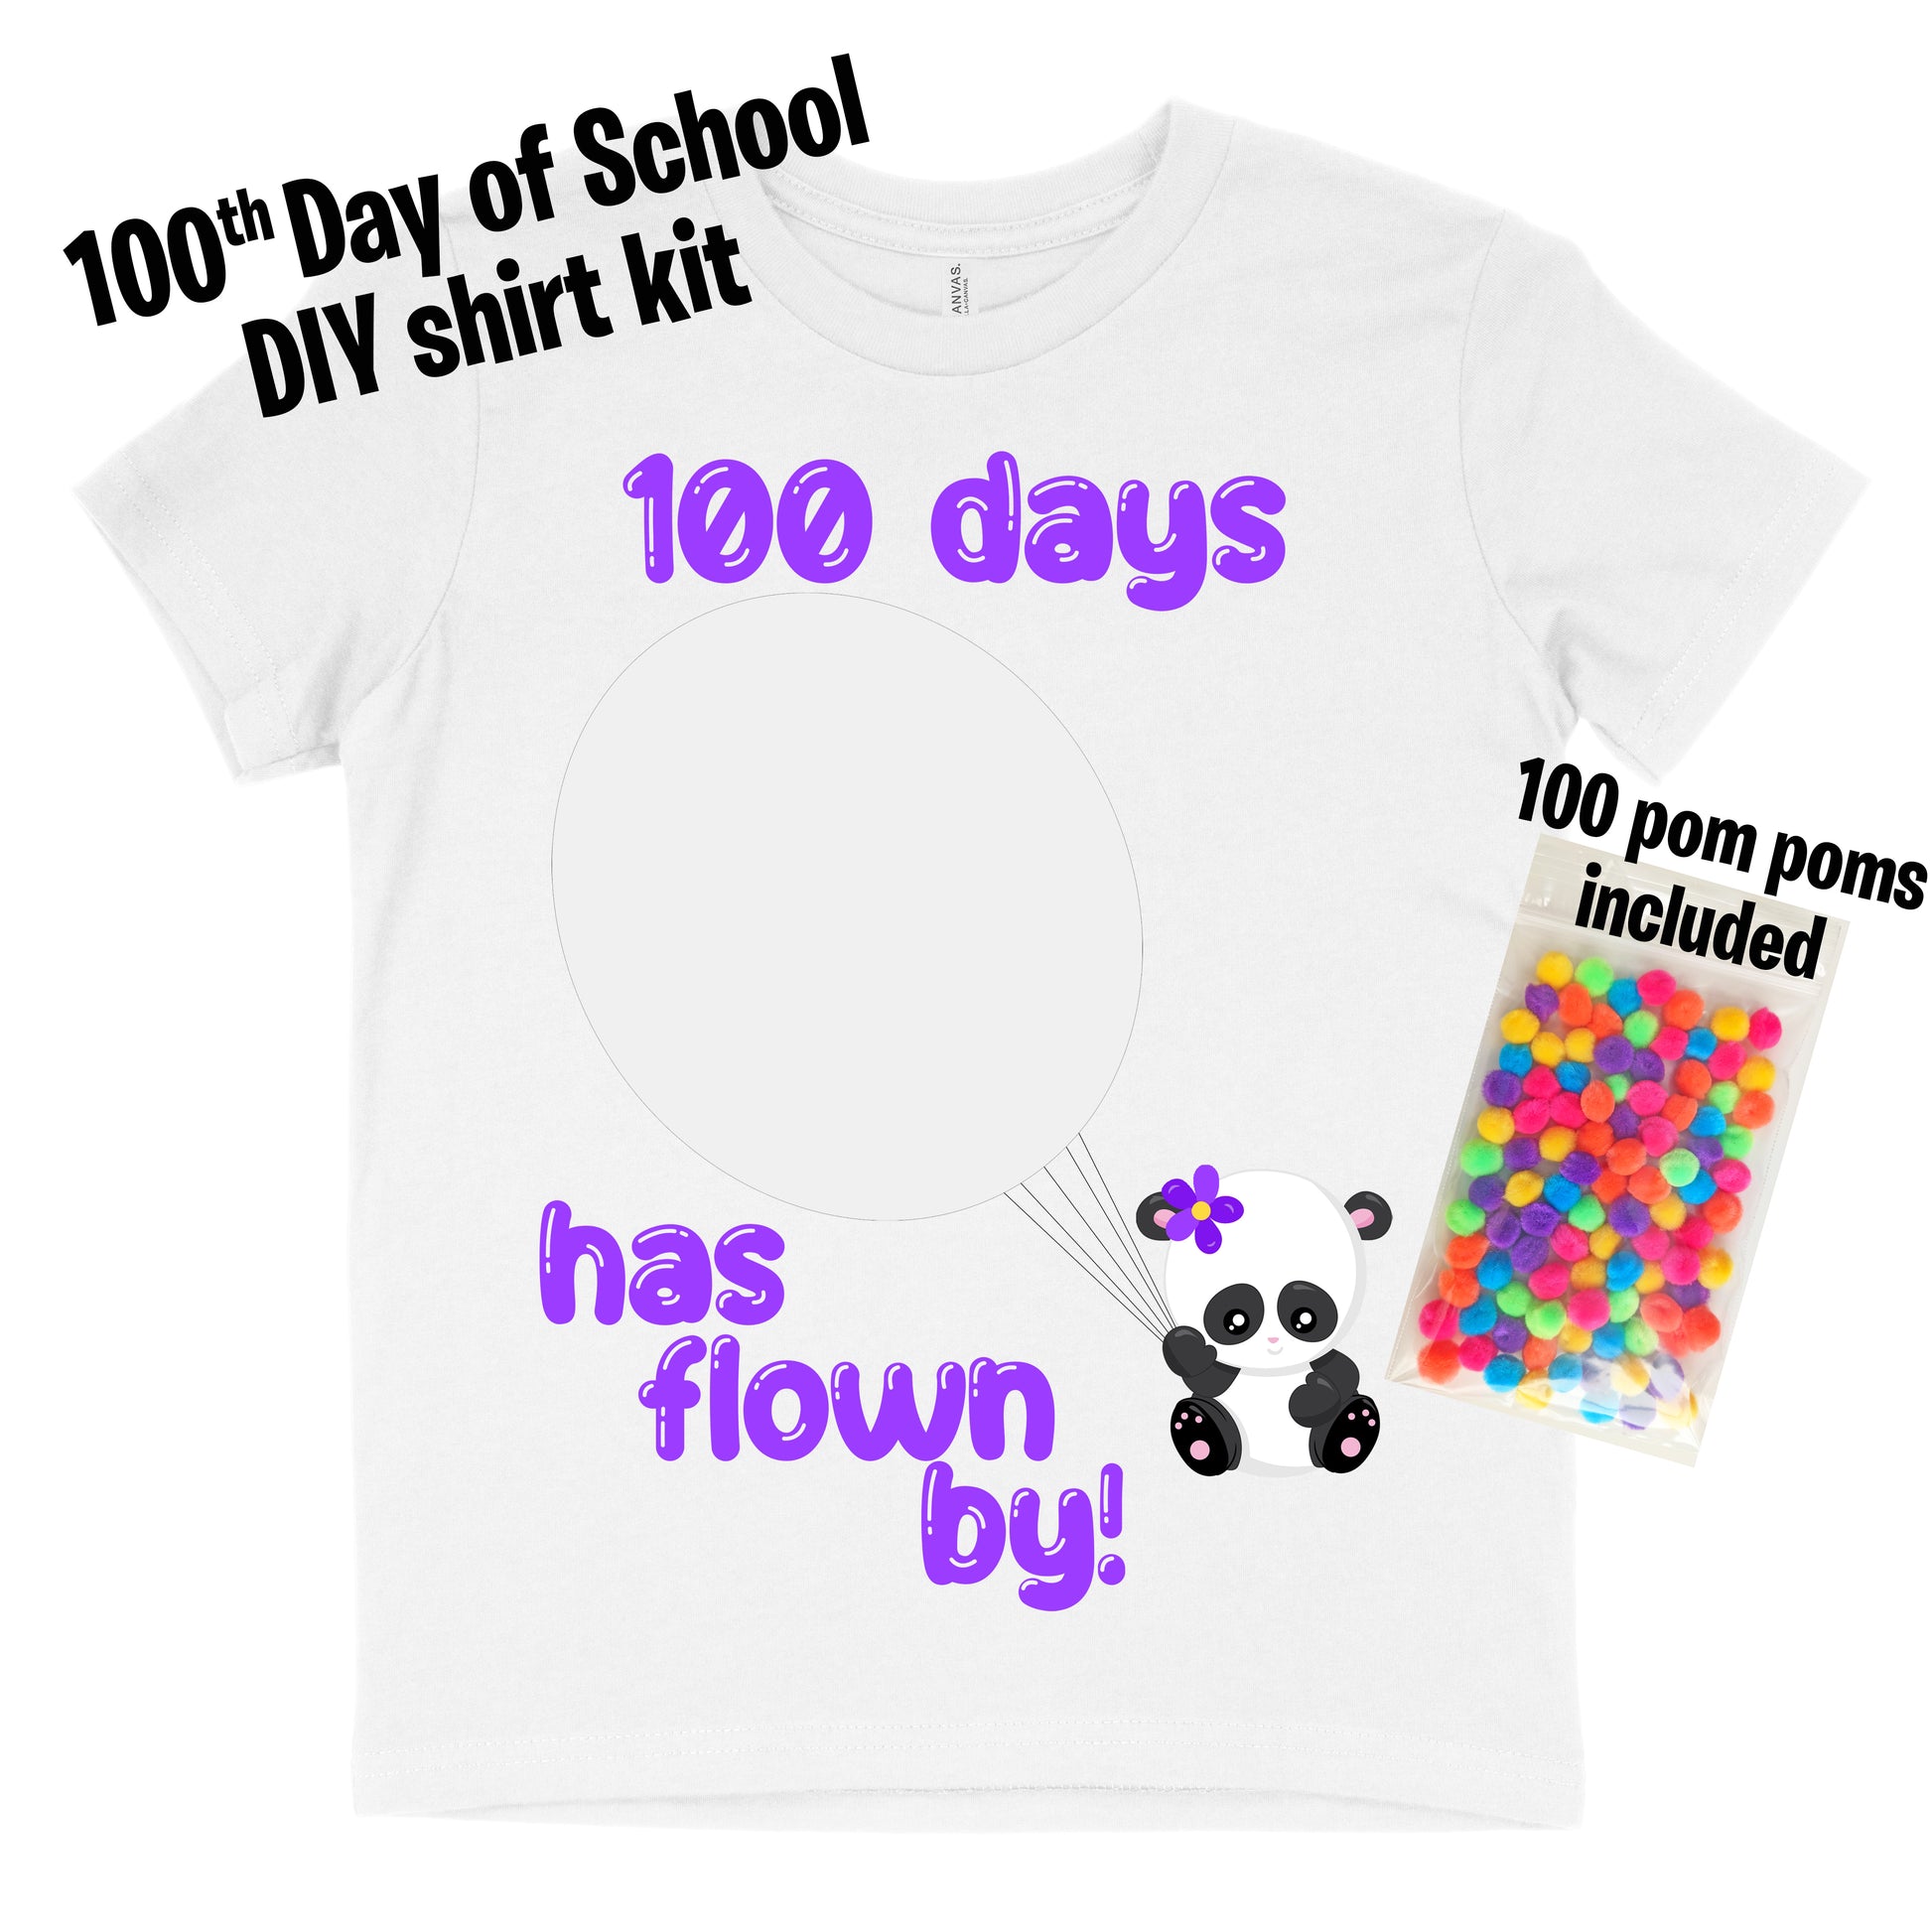 Make your own 100th day of school shirt kit